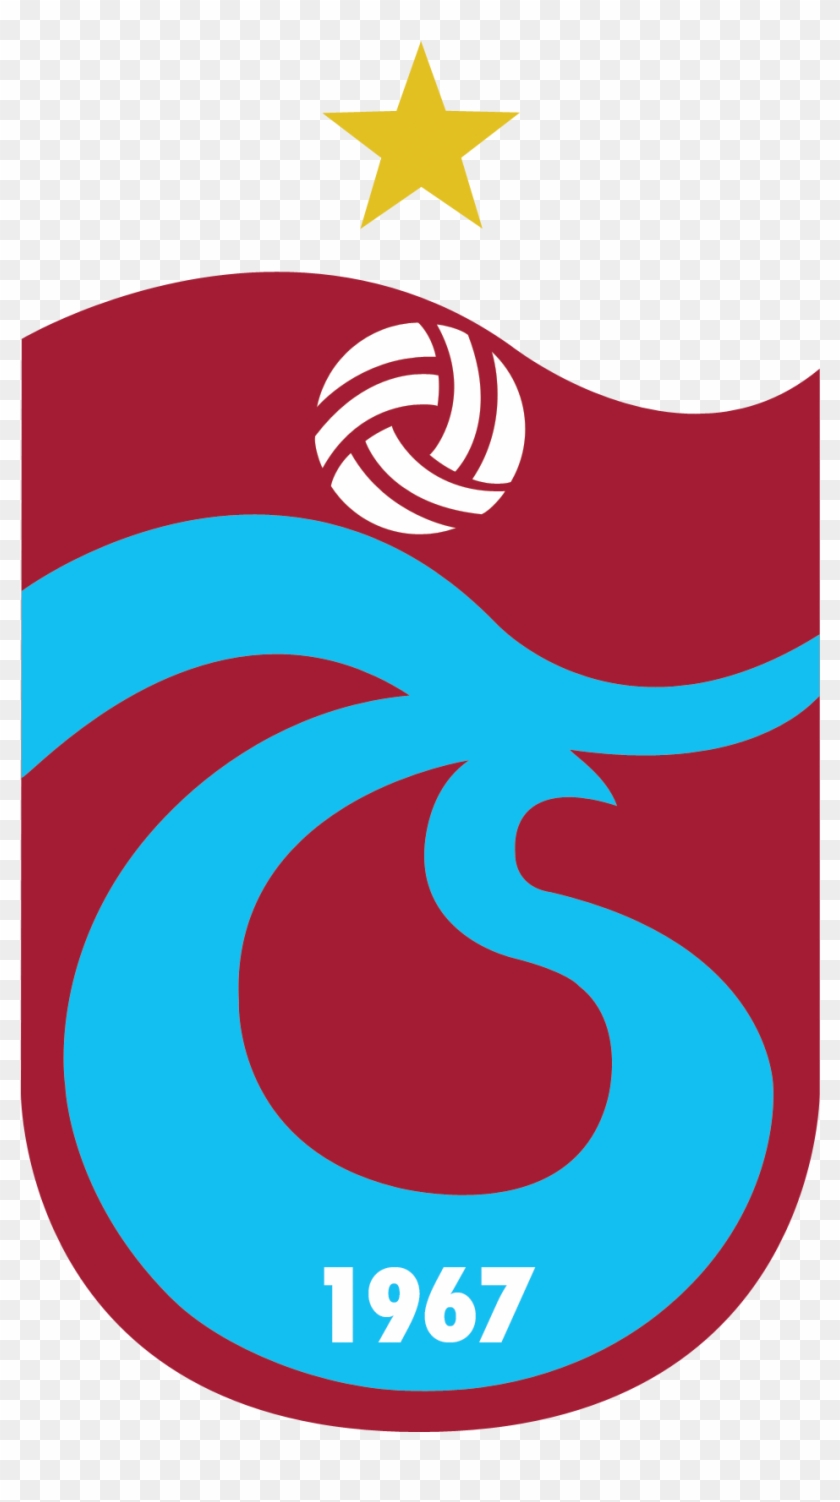 Trabzonspor Super Lig Trabzon Turkey Trabzonspor Free Transparent Png Clipart Images Download - turkey tail roblox